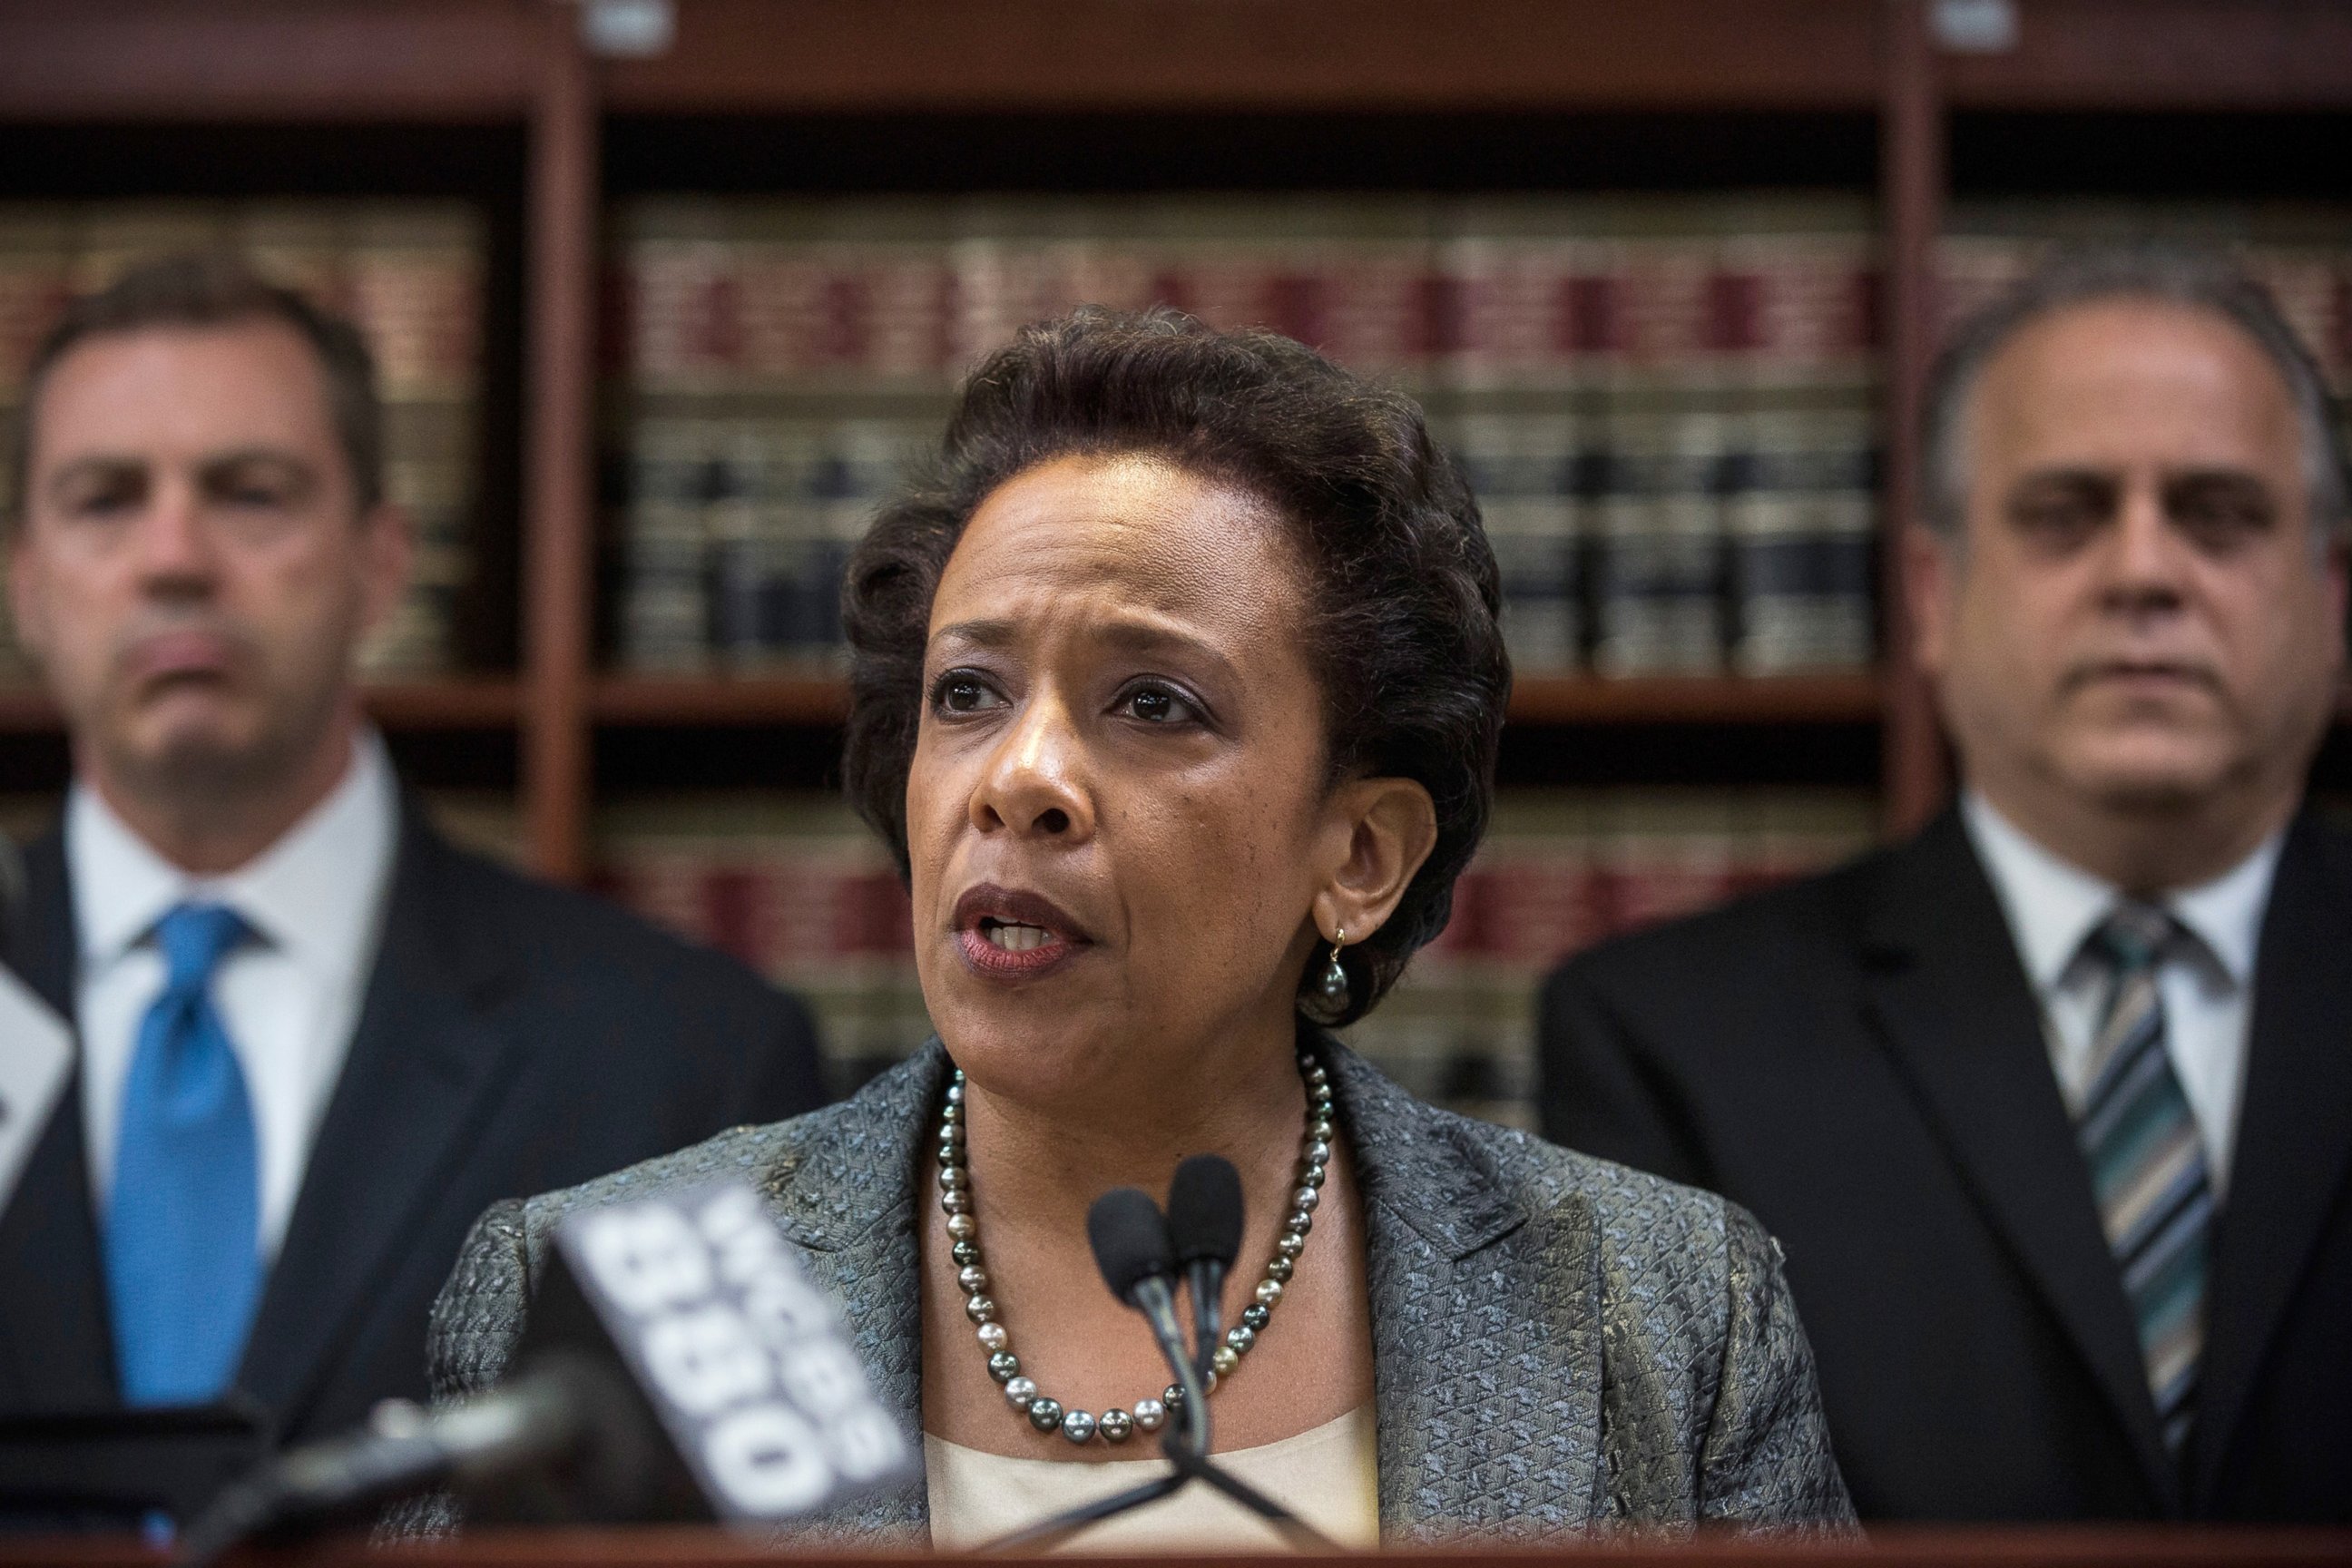 PHOTO: Loretta Lynch, United States Attorney for the Eastern District of New York, speaks at a press conference, April 28, 2014, in New York City. 